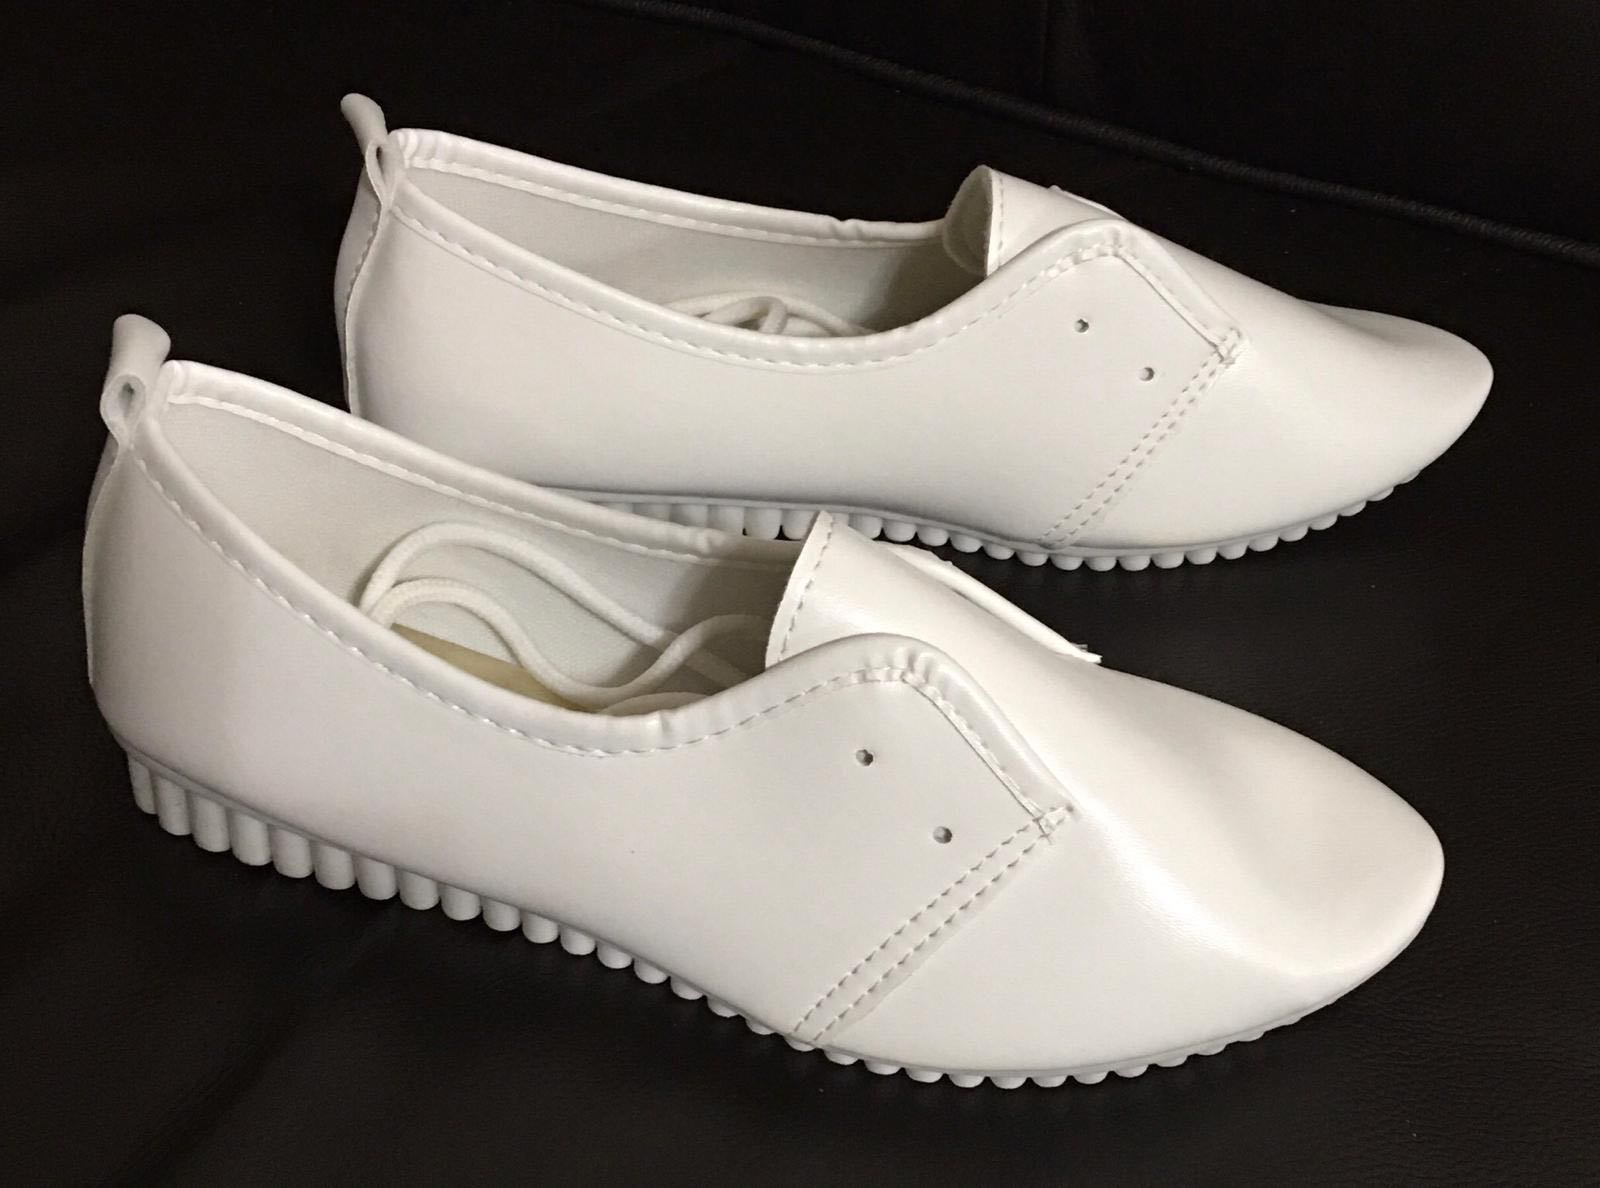 branded rubber shoes for ladies